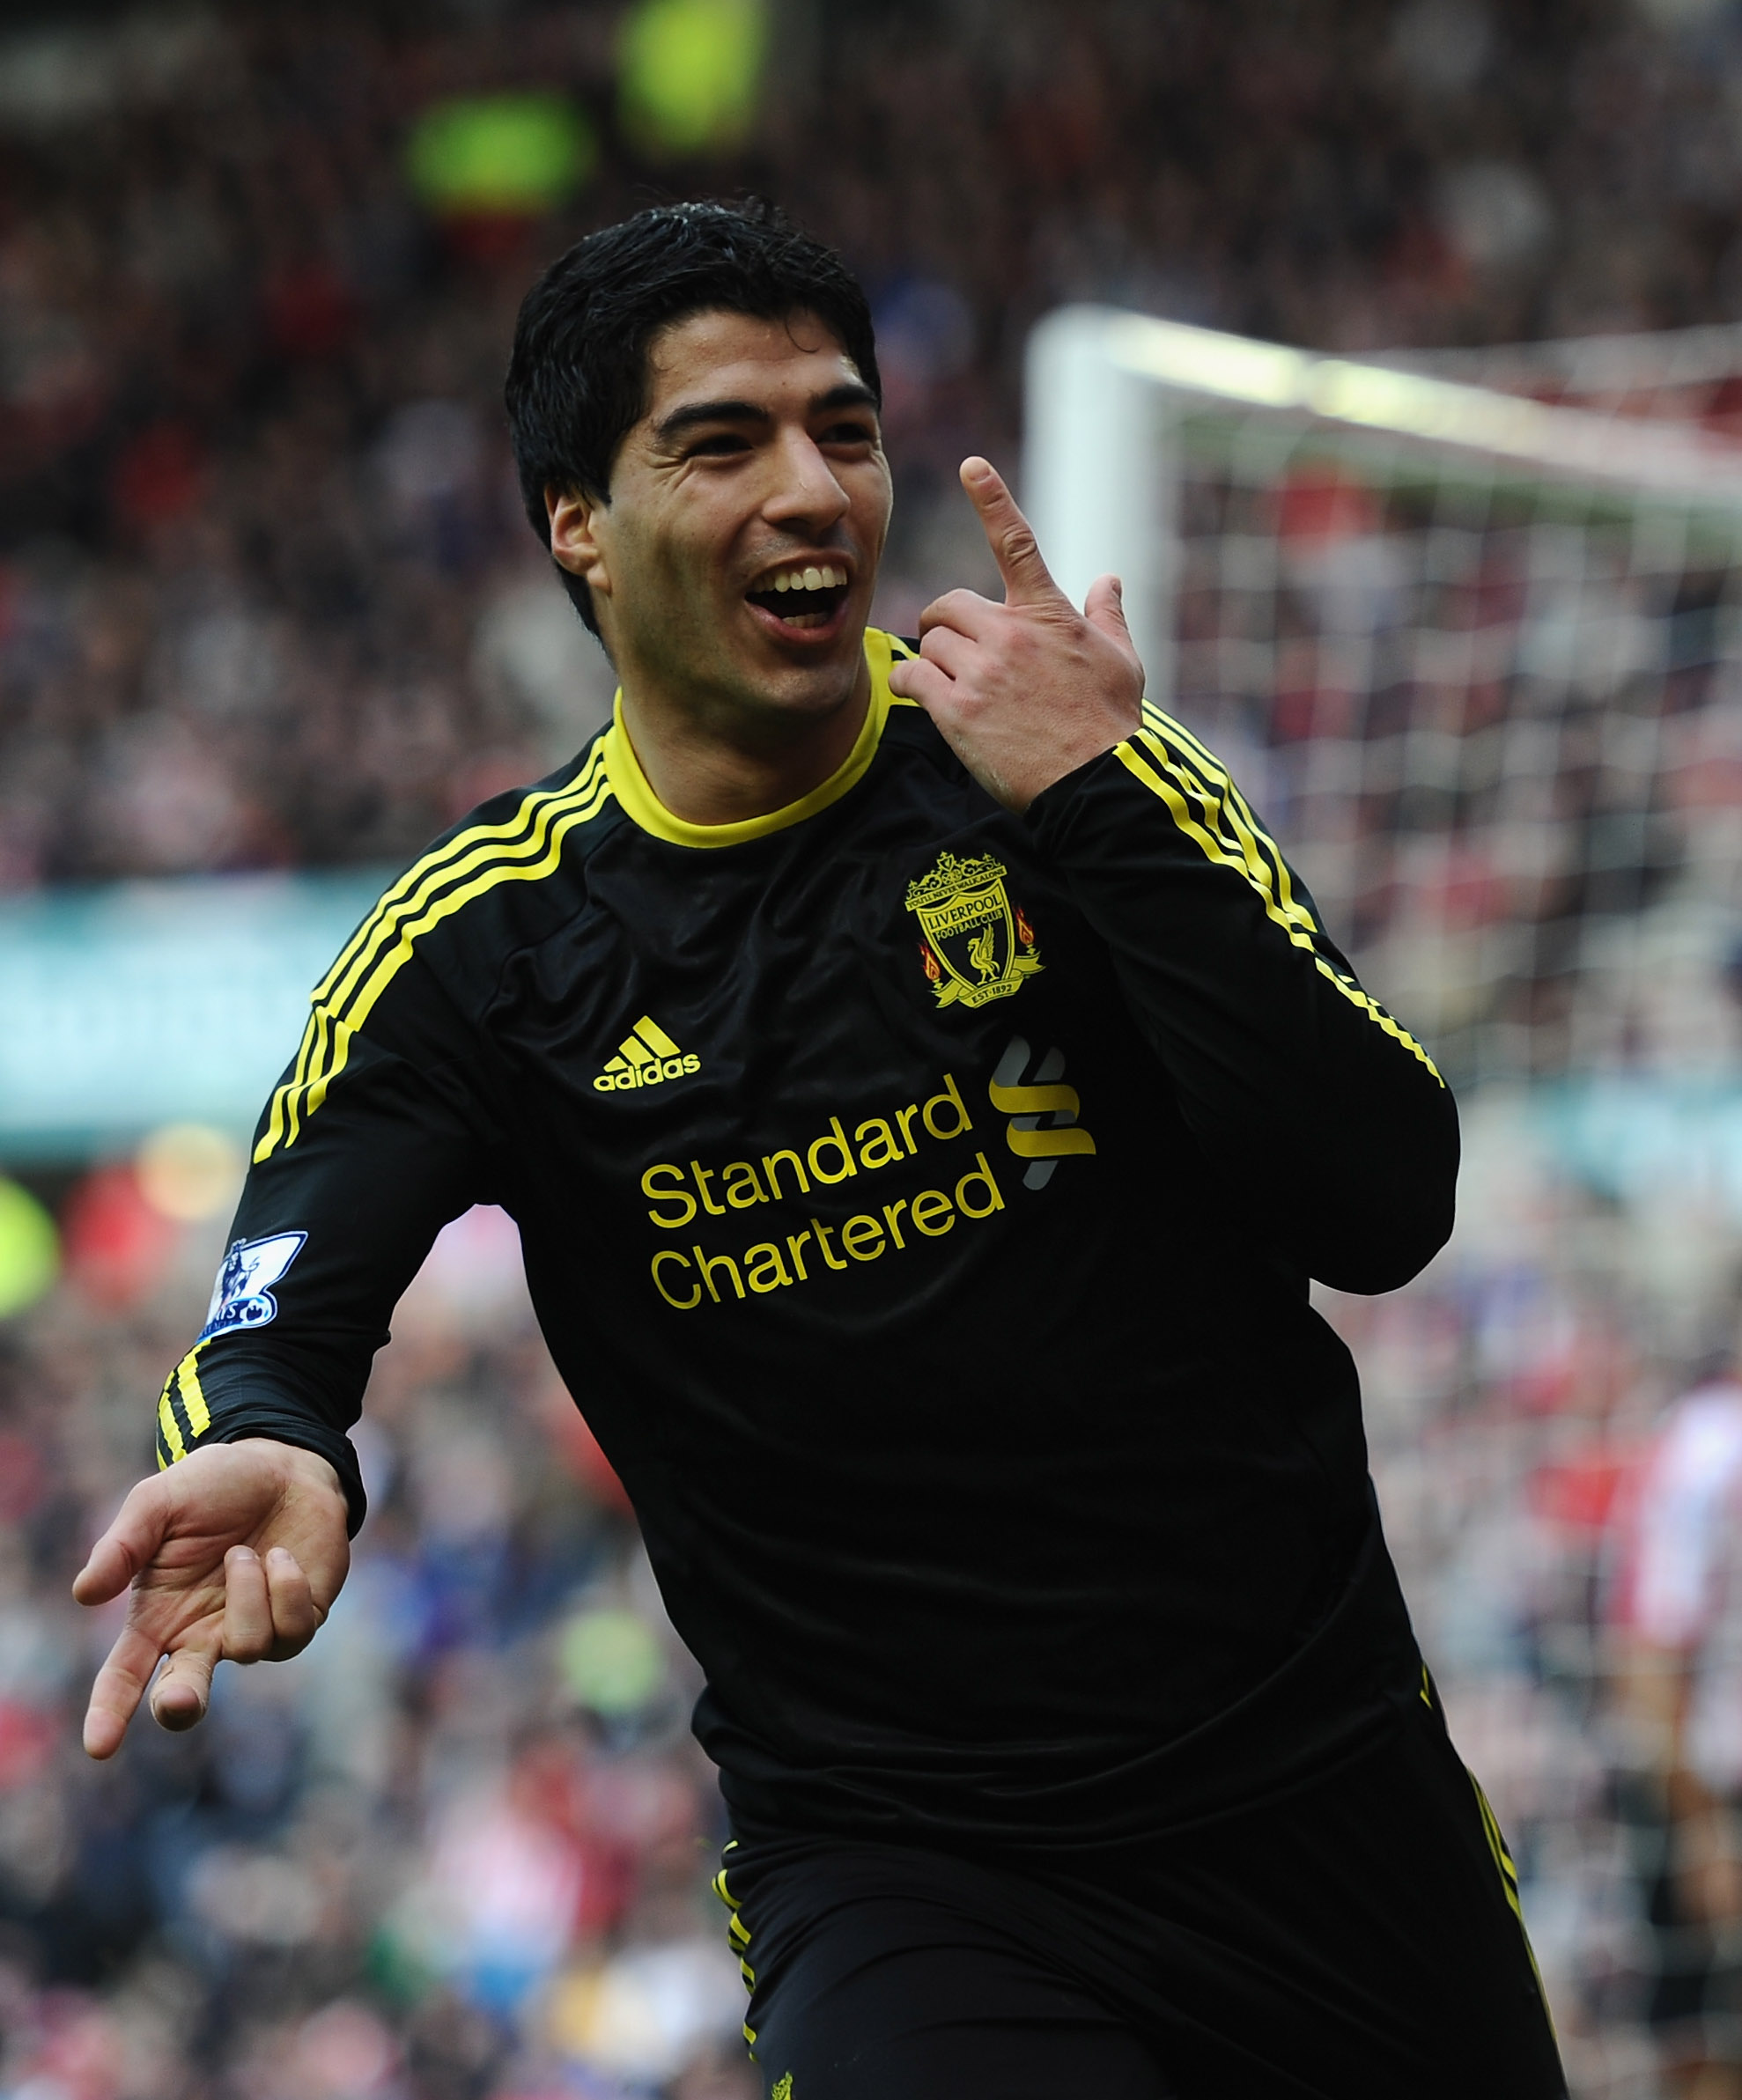 SUNDERLAND, ENGLAND - MARCH 20: Luis Suarez of Liverpool celebrates his goal during the Barclays Premier League match between Sunderland and Liverpool at the Stadium of Light on March 20, 2011 in Sunderland, England.  (Photo by Laurence Griffiths/Getty Im